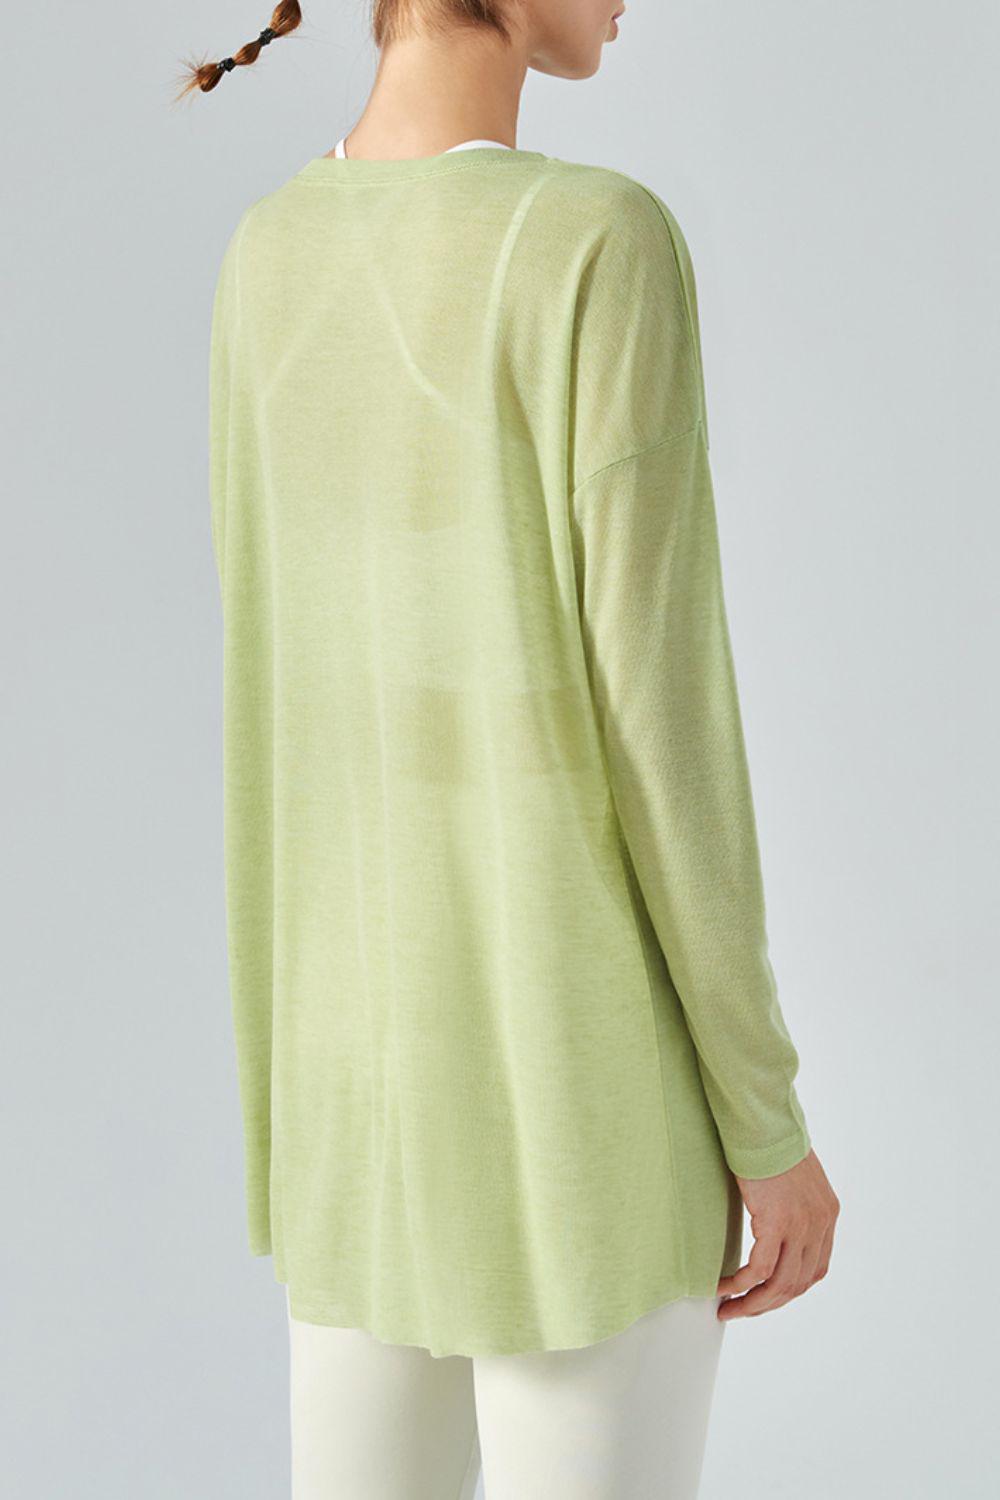 Round Neck Slit Sheer Tunic Sports Top-Ship From Overseas, ZJtree-Matcha-S/M-[option4]-[option5]-[option6]-Womens-USA-Clothing-Boutique-Shop-Online-Clothes Minded